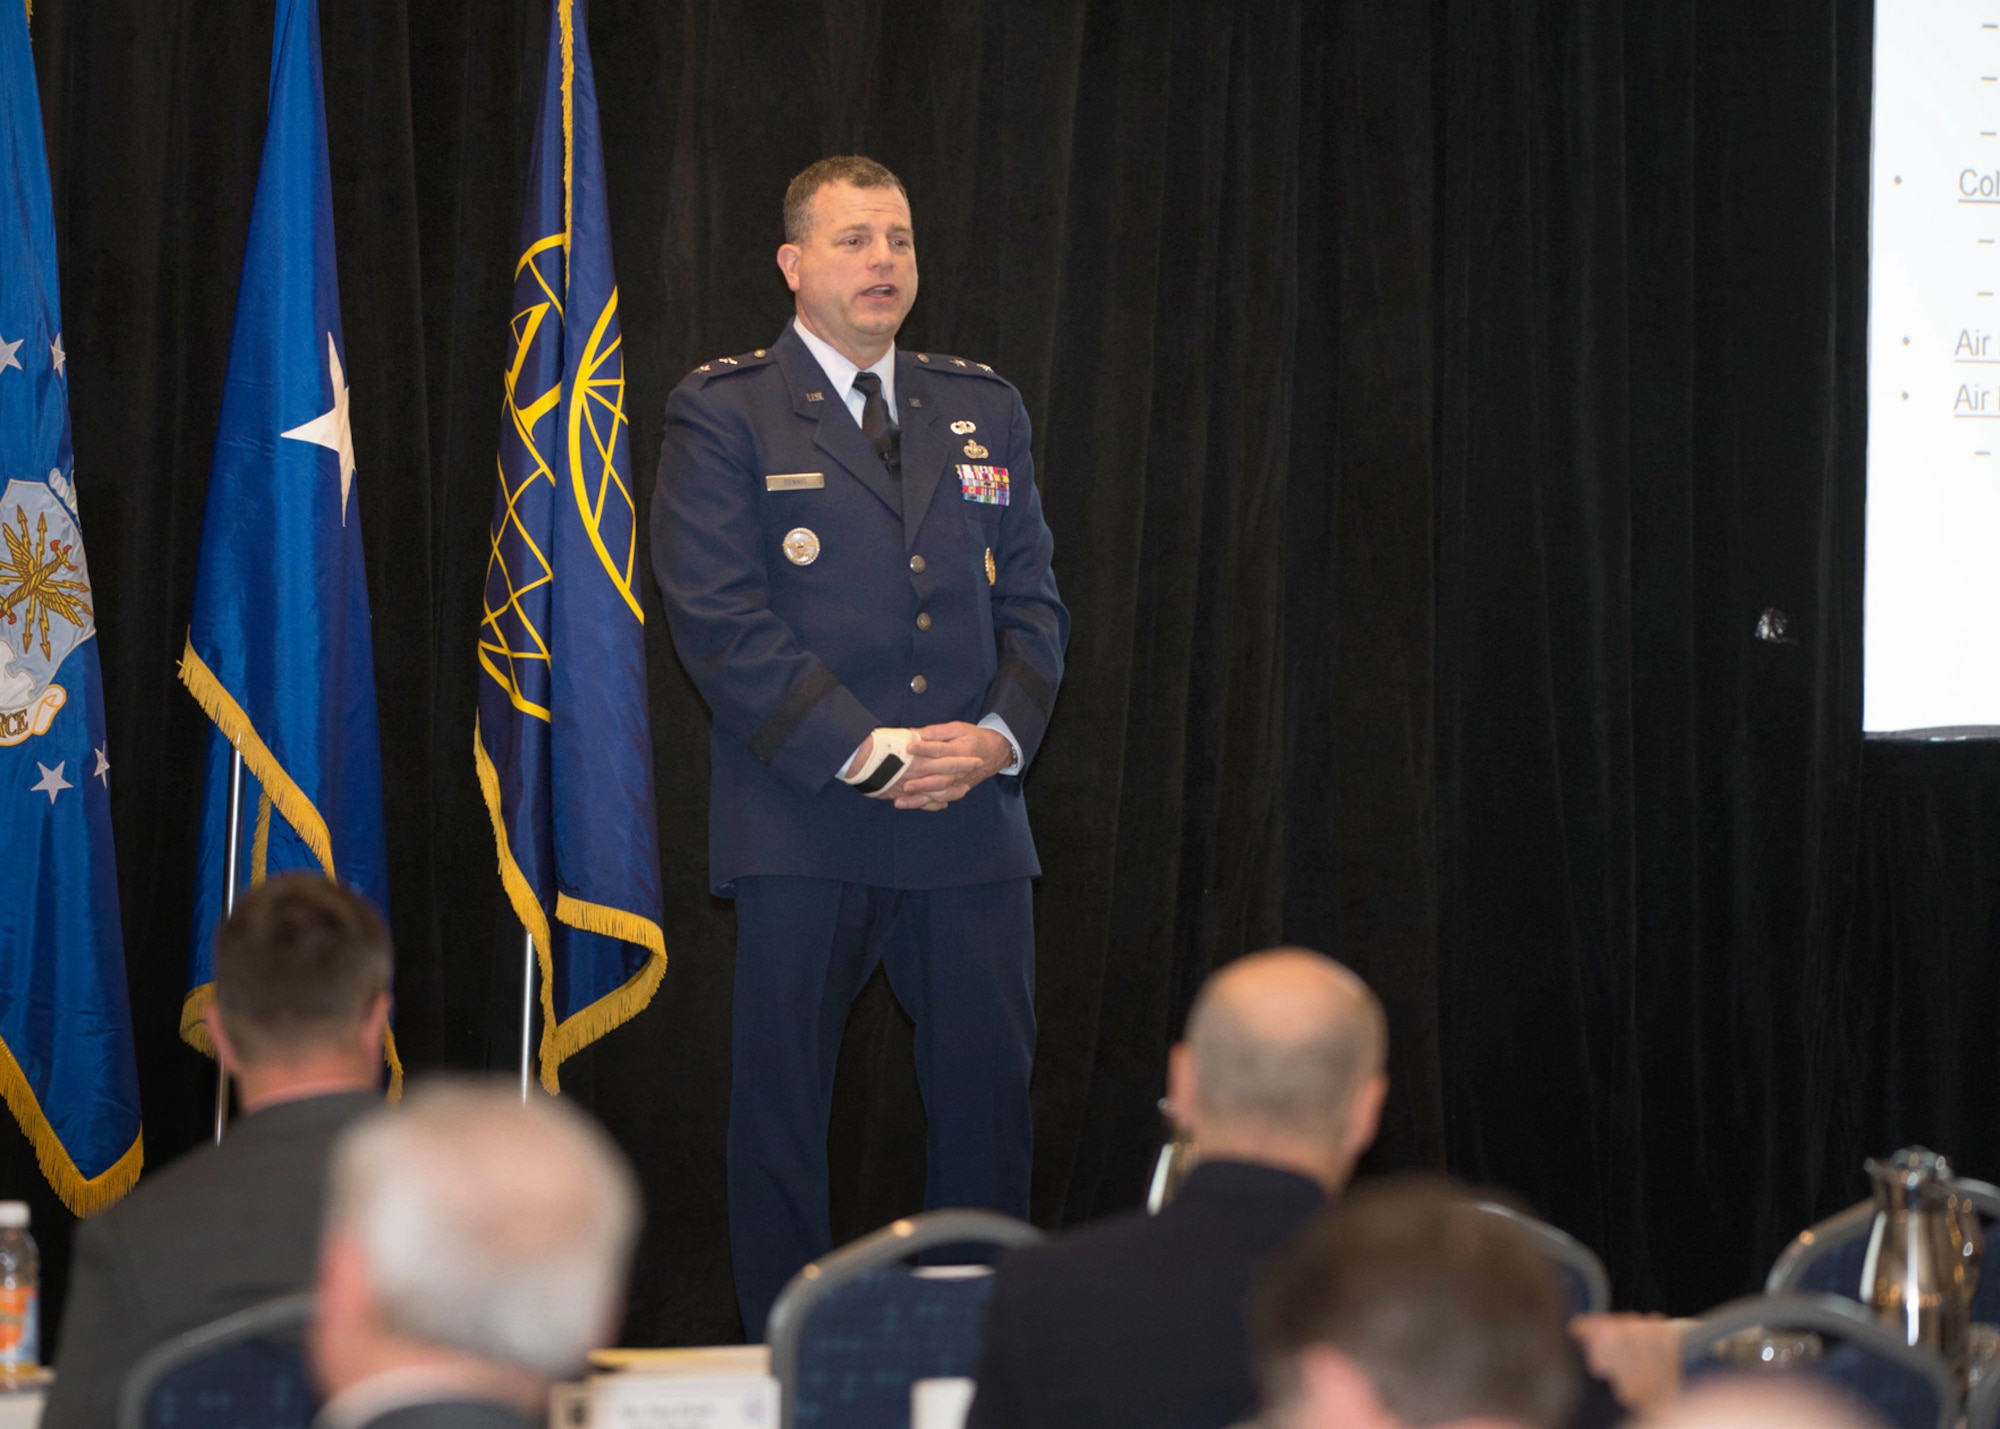 Maj. Gen. Dwyer Dennis, Command, Control, Communications, Intelligence and Networks program executive officer, speaks to the audience at the annual New Horizons symposium in Newton, Mass., on March 14. Dennis, along with the other PEOs from Hanscom Air Force Base, Mass., presented business opportunities and spoke about ongoing and upcoming work during the two-day event, which was conducted despite blizzard conditions throughout the Northeast. (U.S. Air Force photo by Jerry Saslav) 